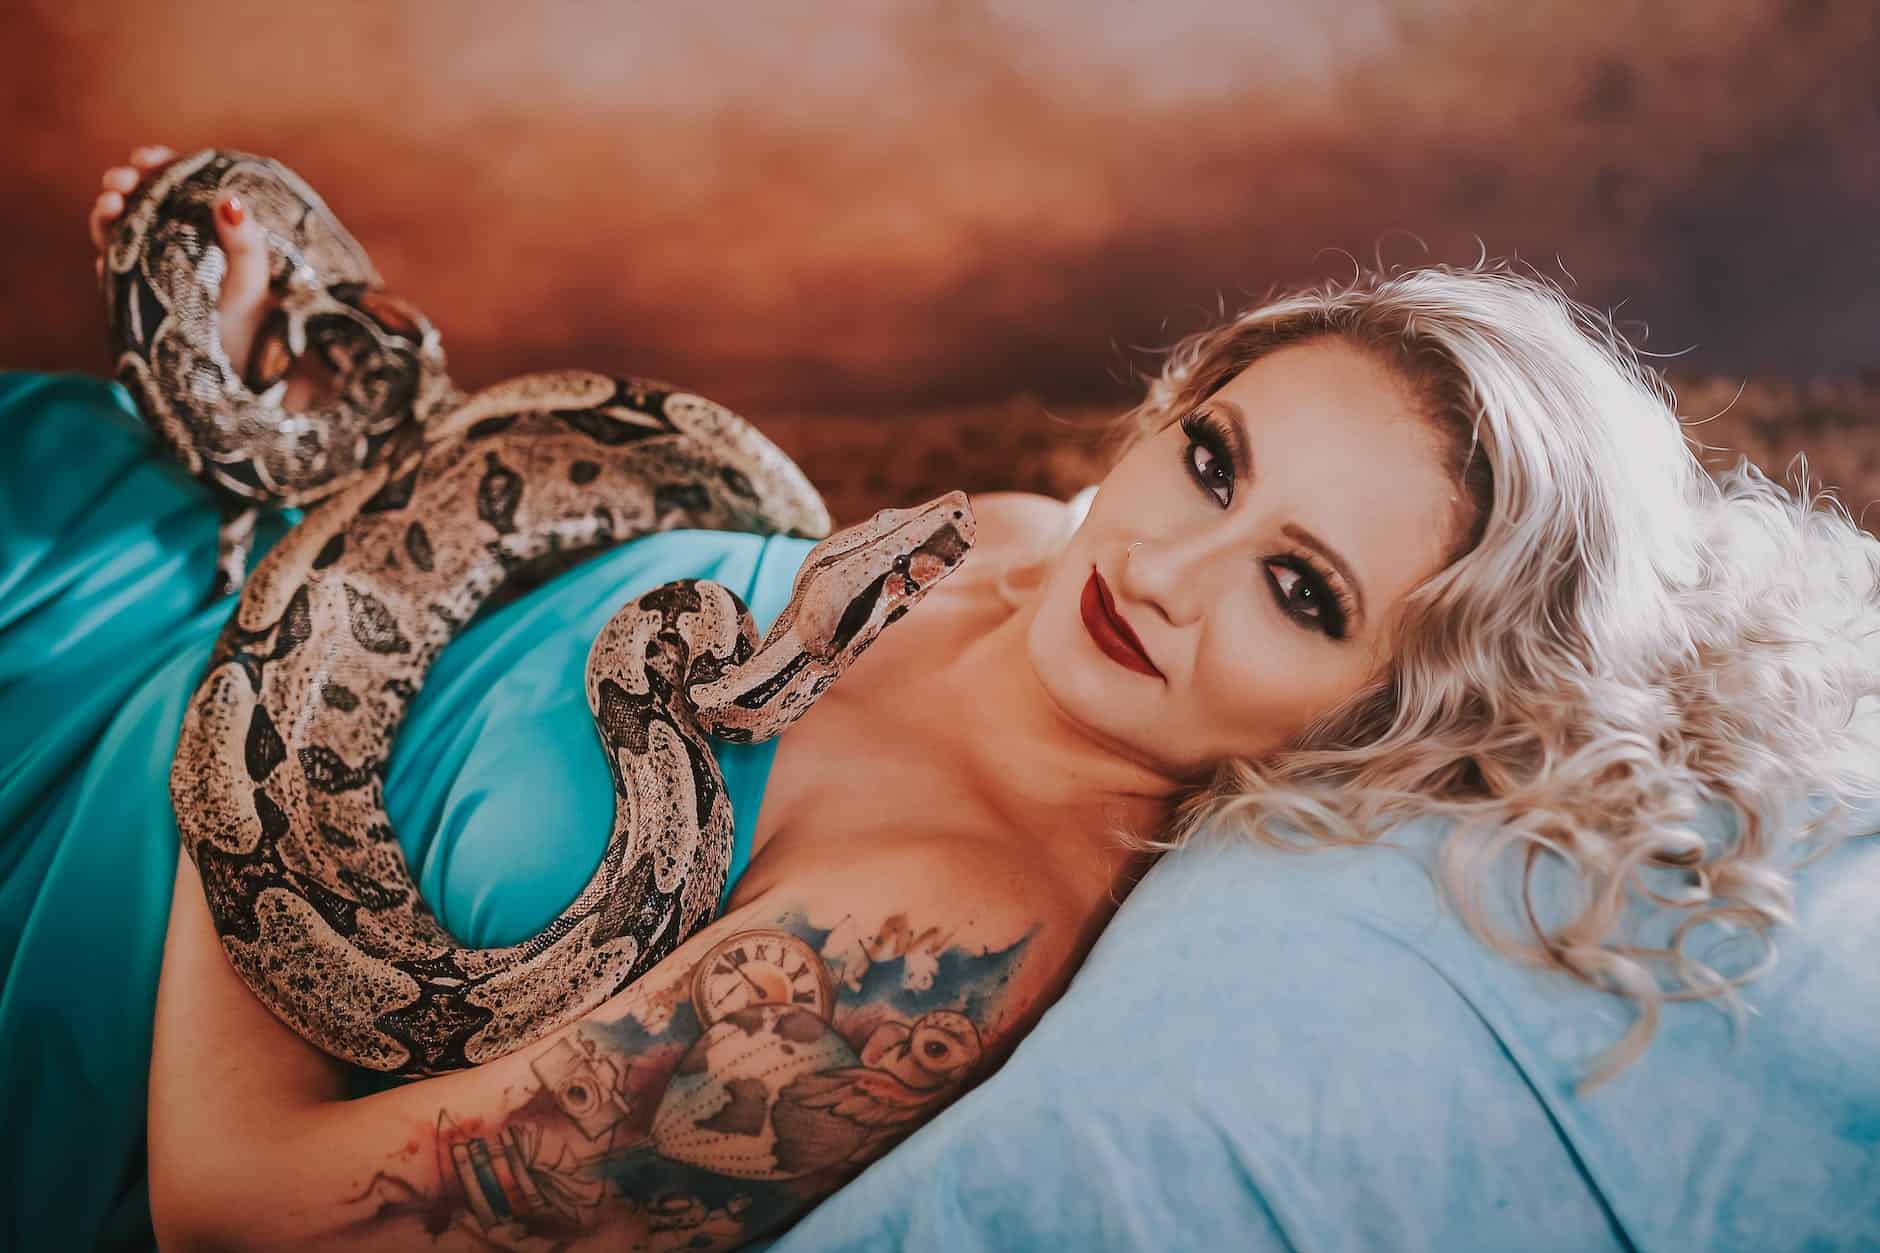 photo of a woman with a tattoo posing with a python